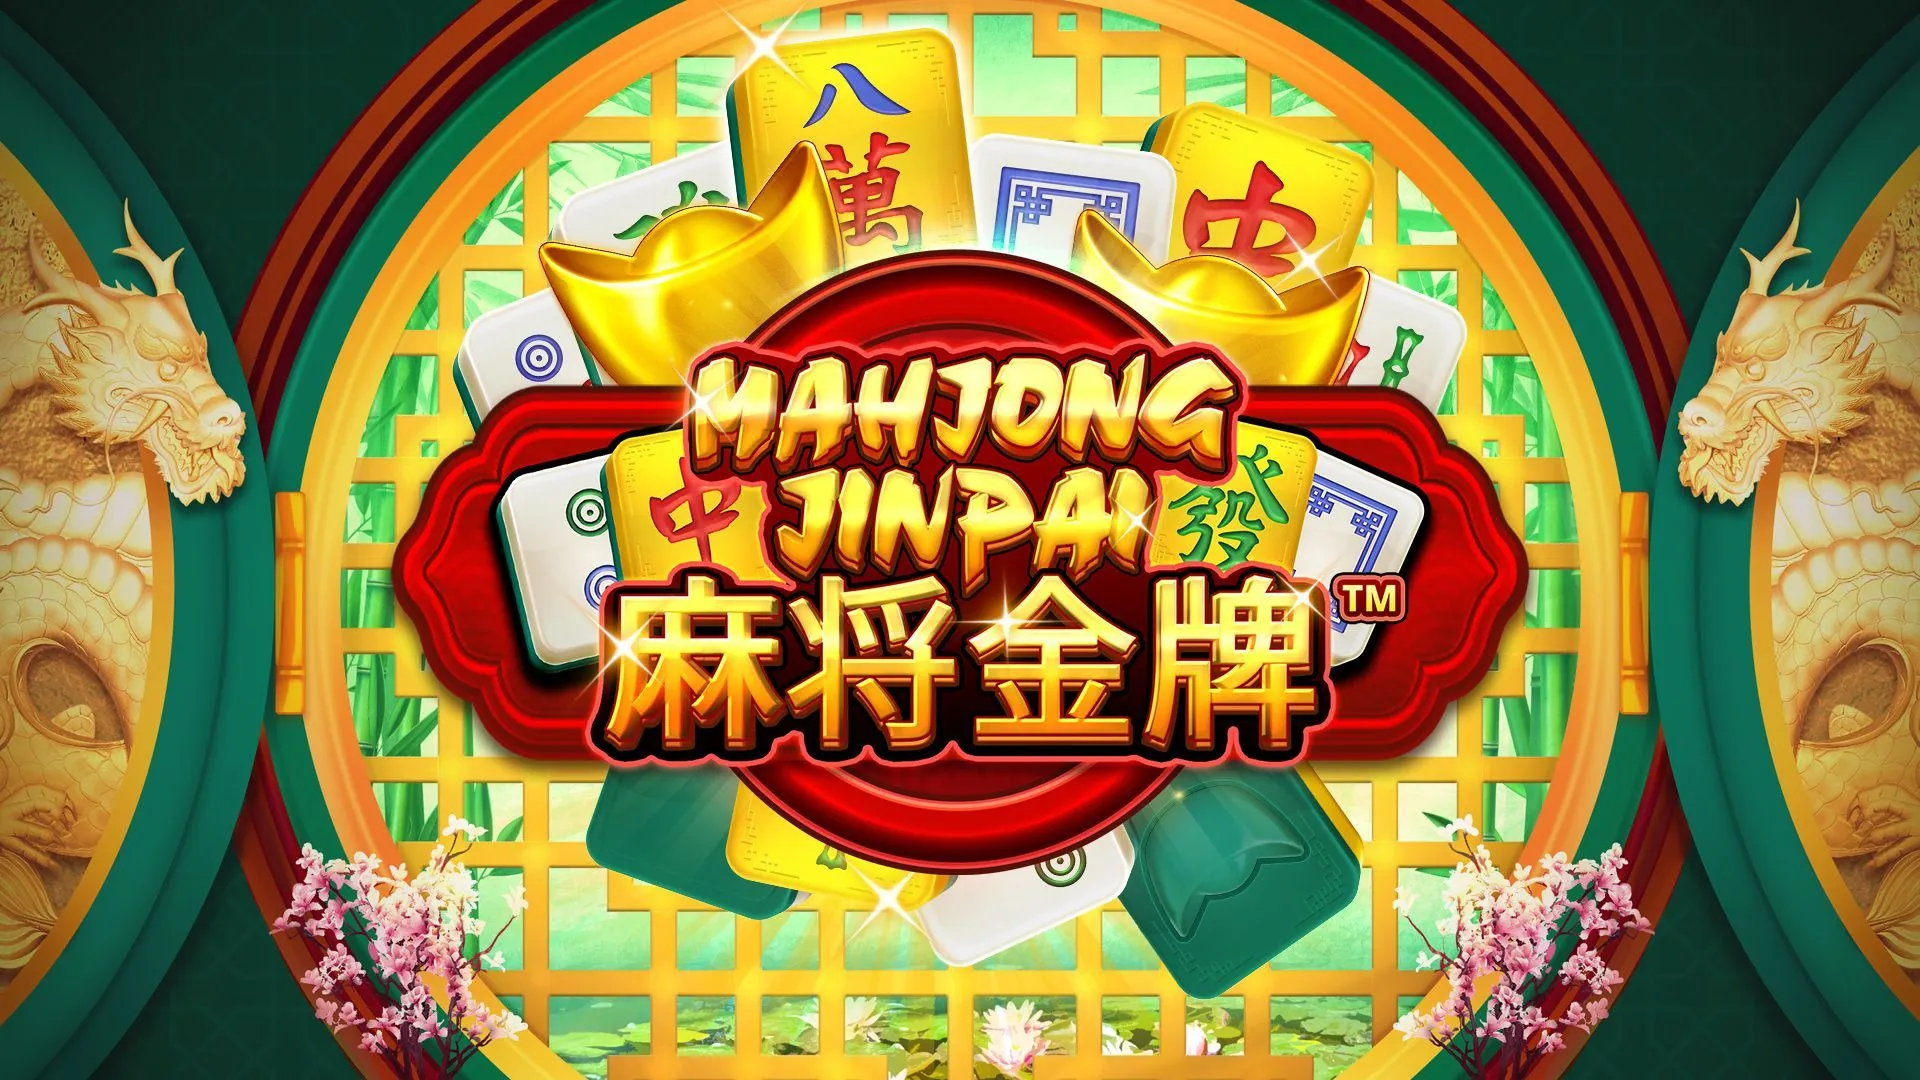 Get ready to shout Mahjong,  our homage Mahjong Jinpaiᵀᴹ is out now!